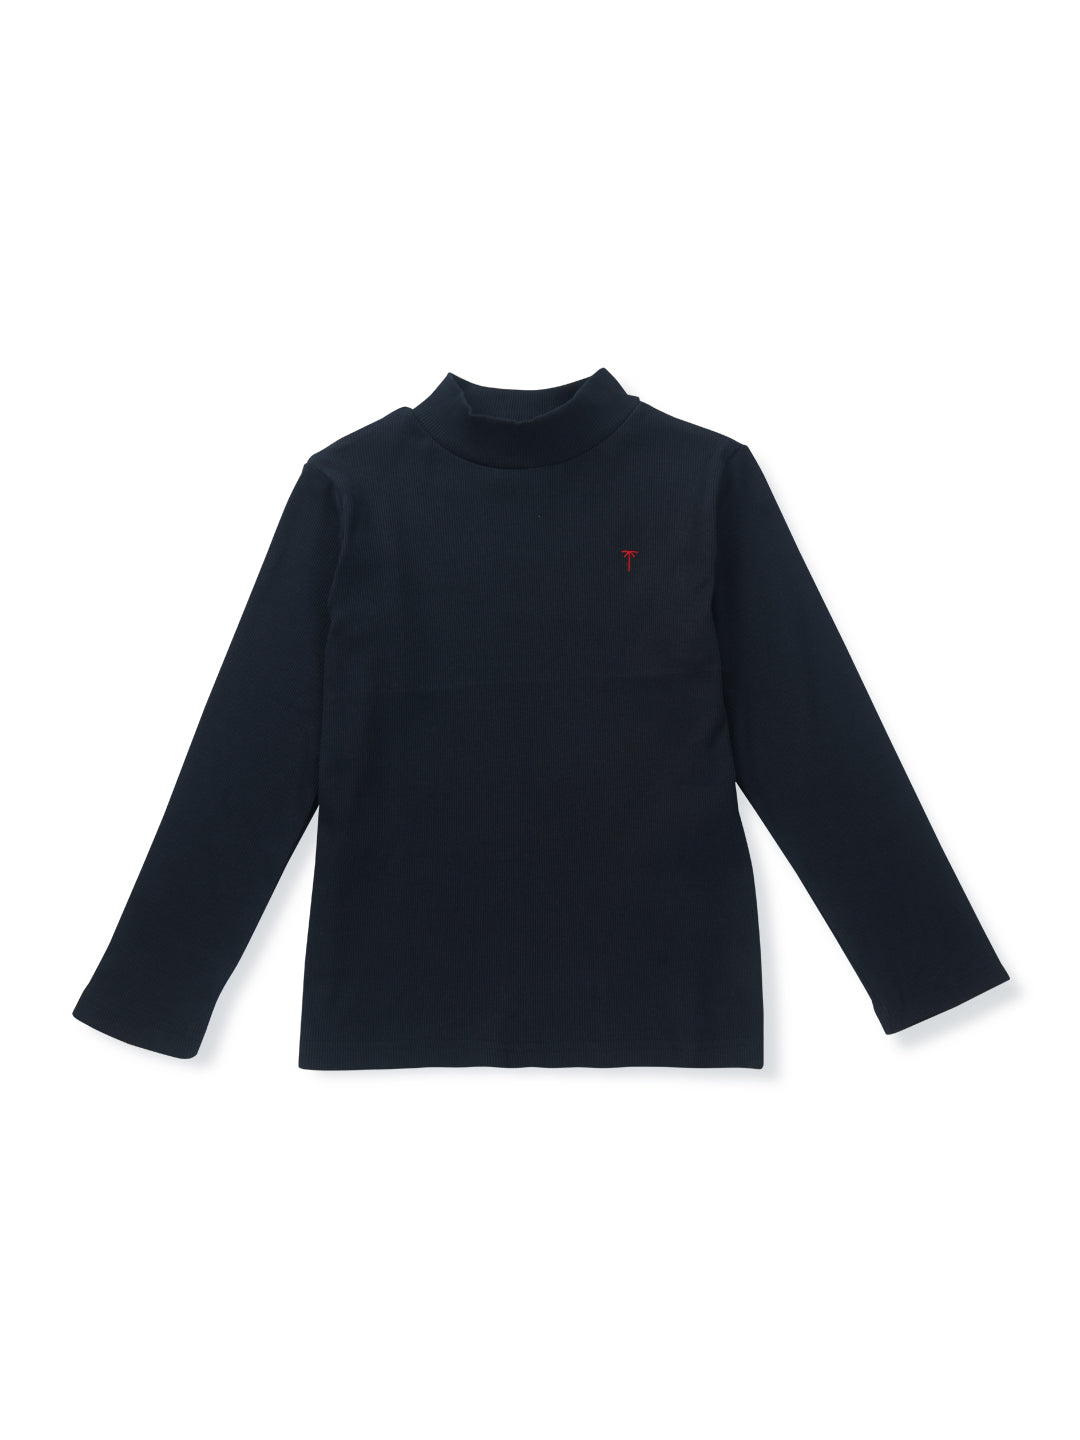 Girls Navy Blue Solid Cotton Knits Top